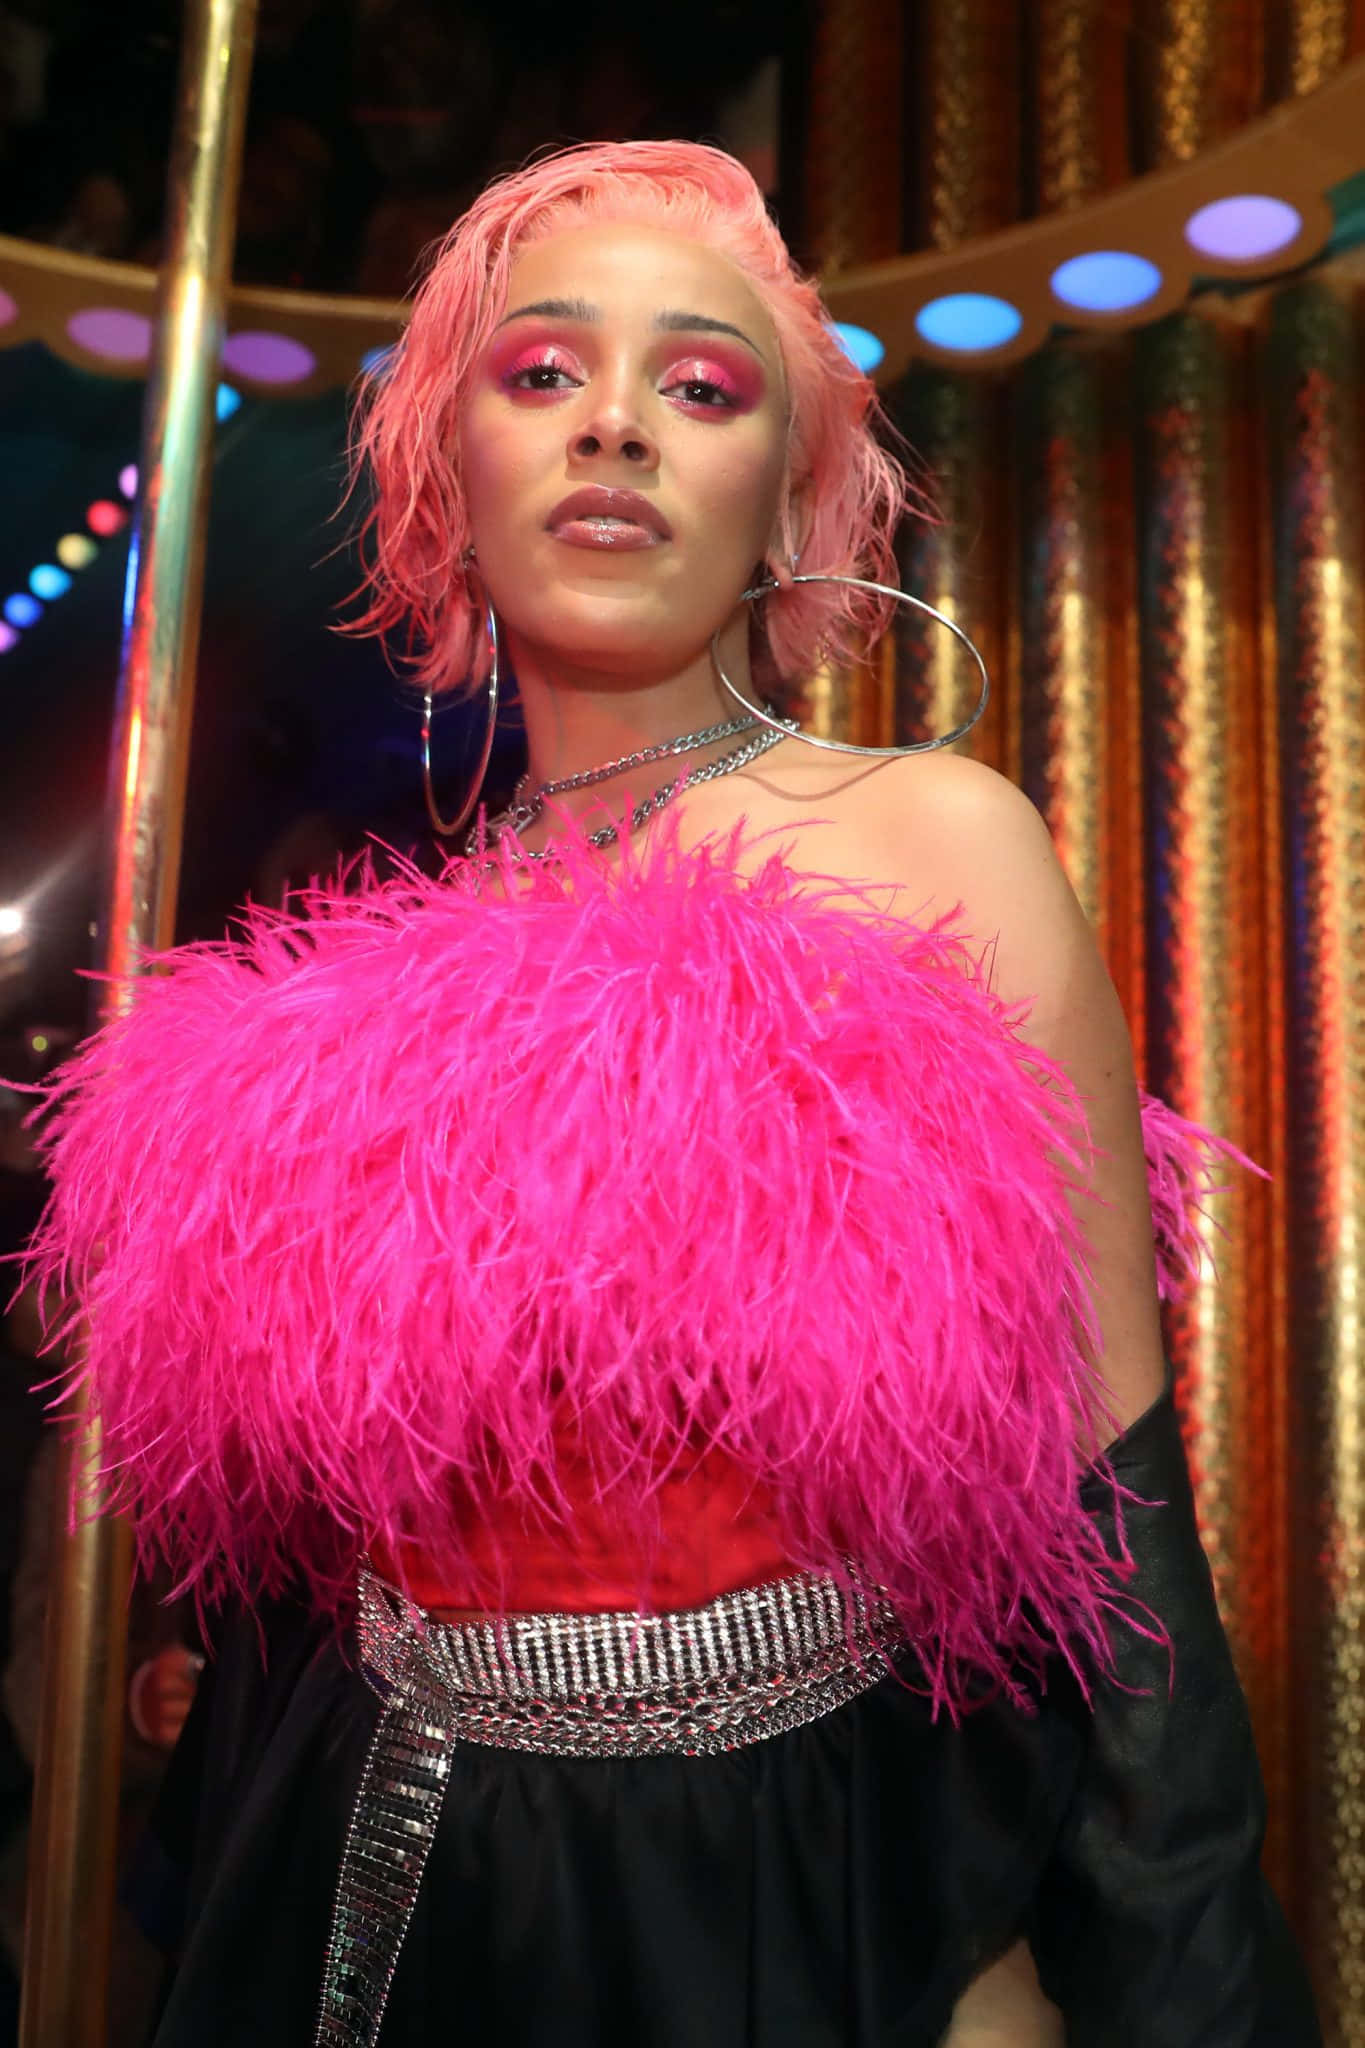 A Woman In A Pink Feathered Dress Is Standing In Front Of A Bar